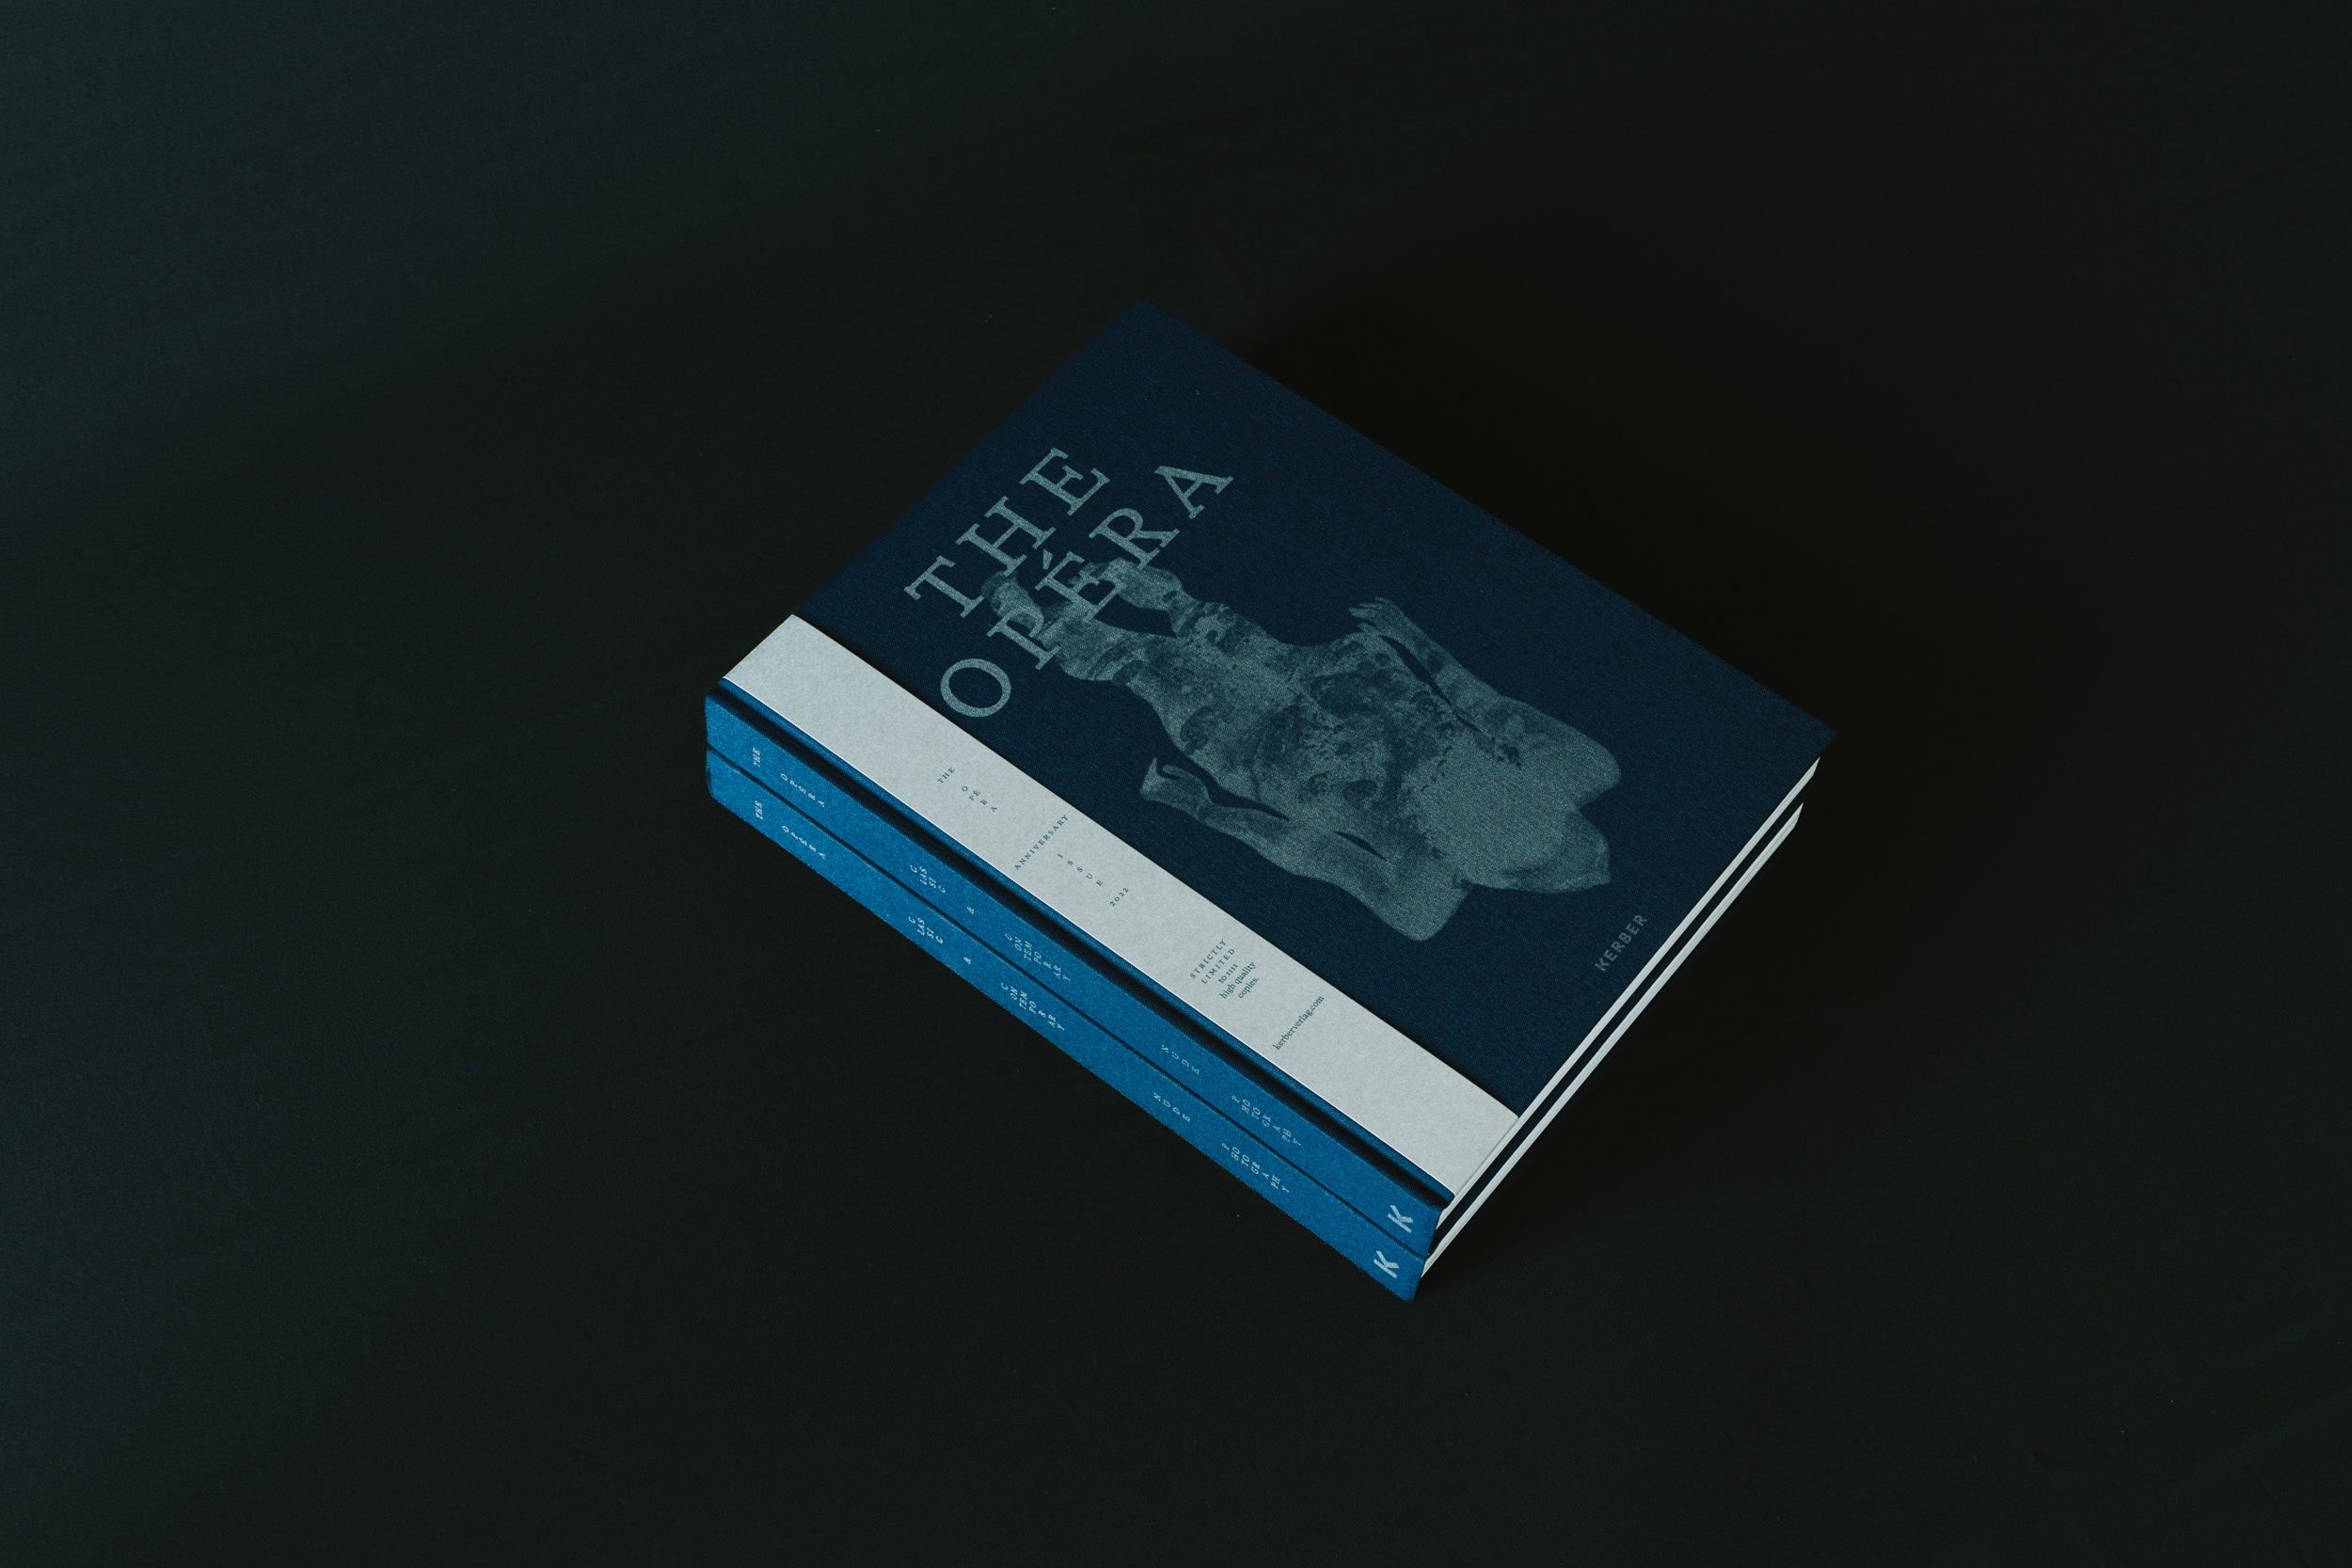 The front cover contains silver printing on blue linen containing the work of Bastiaan Woudt